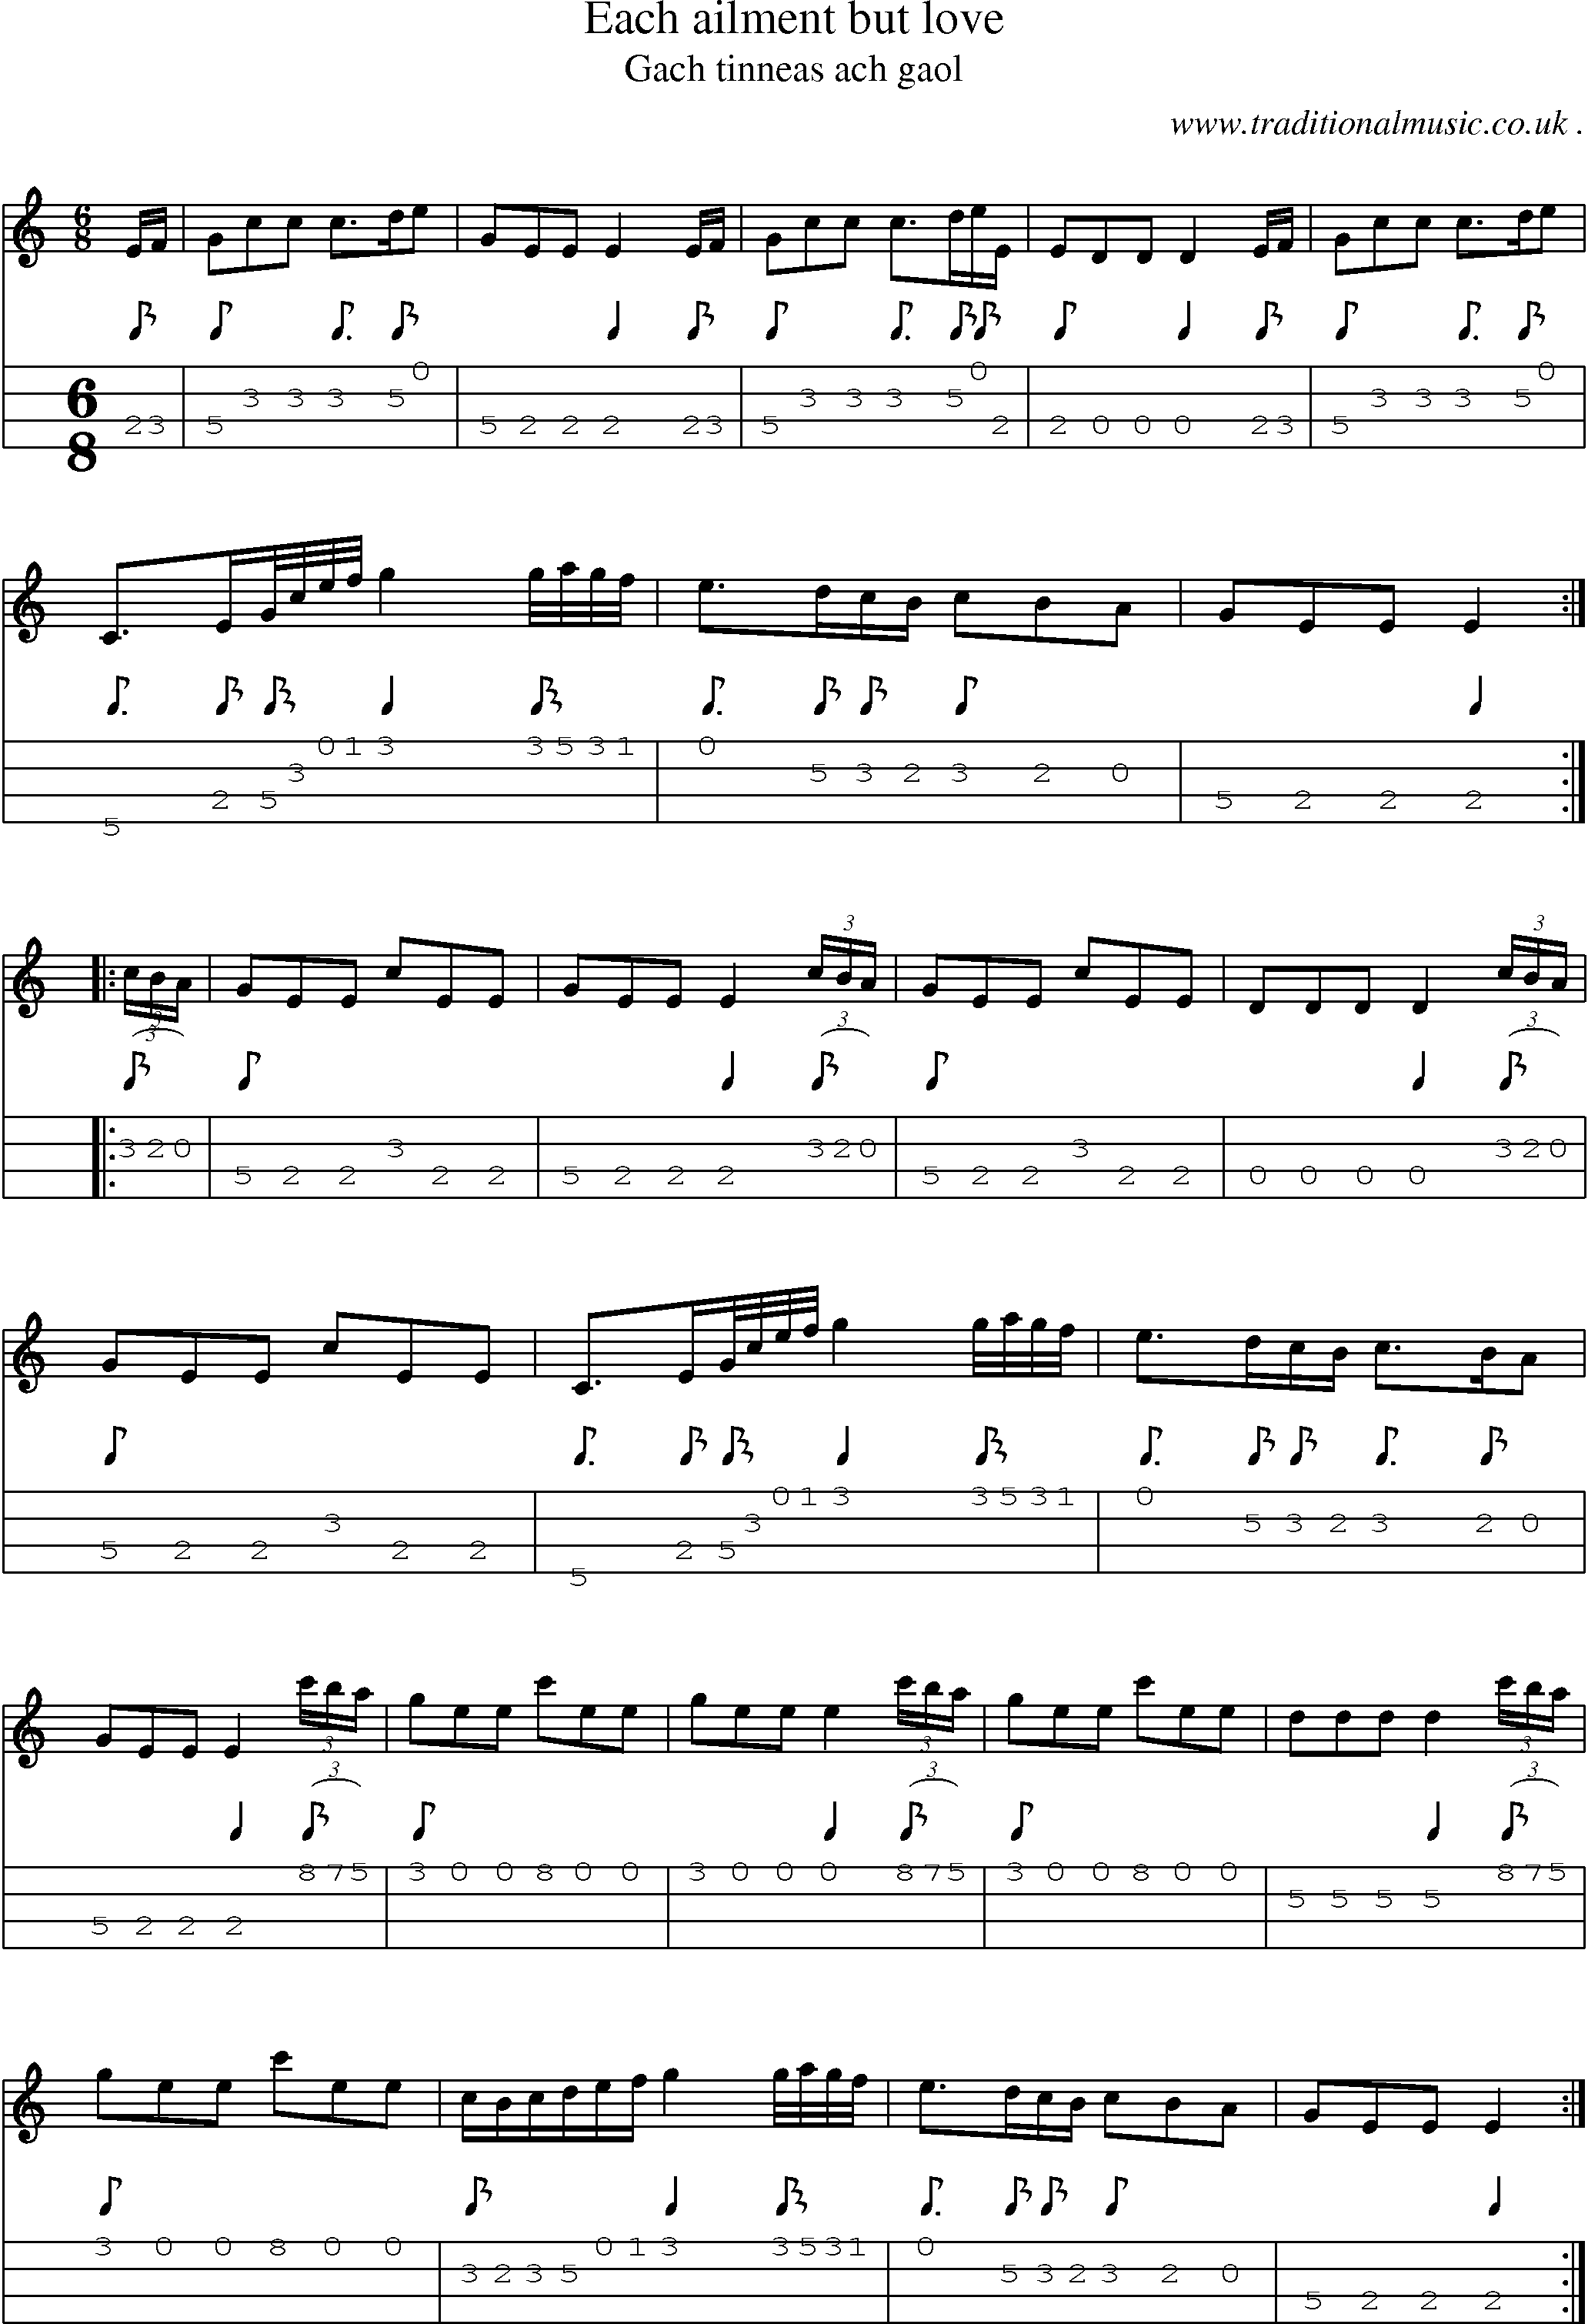 Sheet-music  score, Chords and Mandolin Tabs for Each Ailment But Love